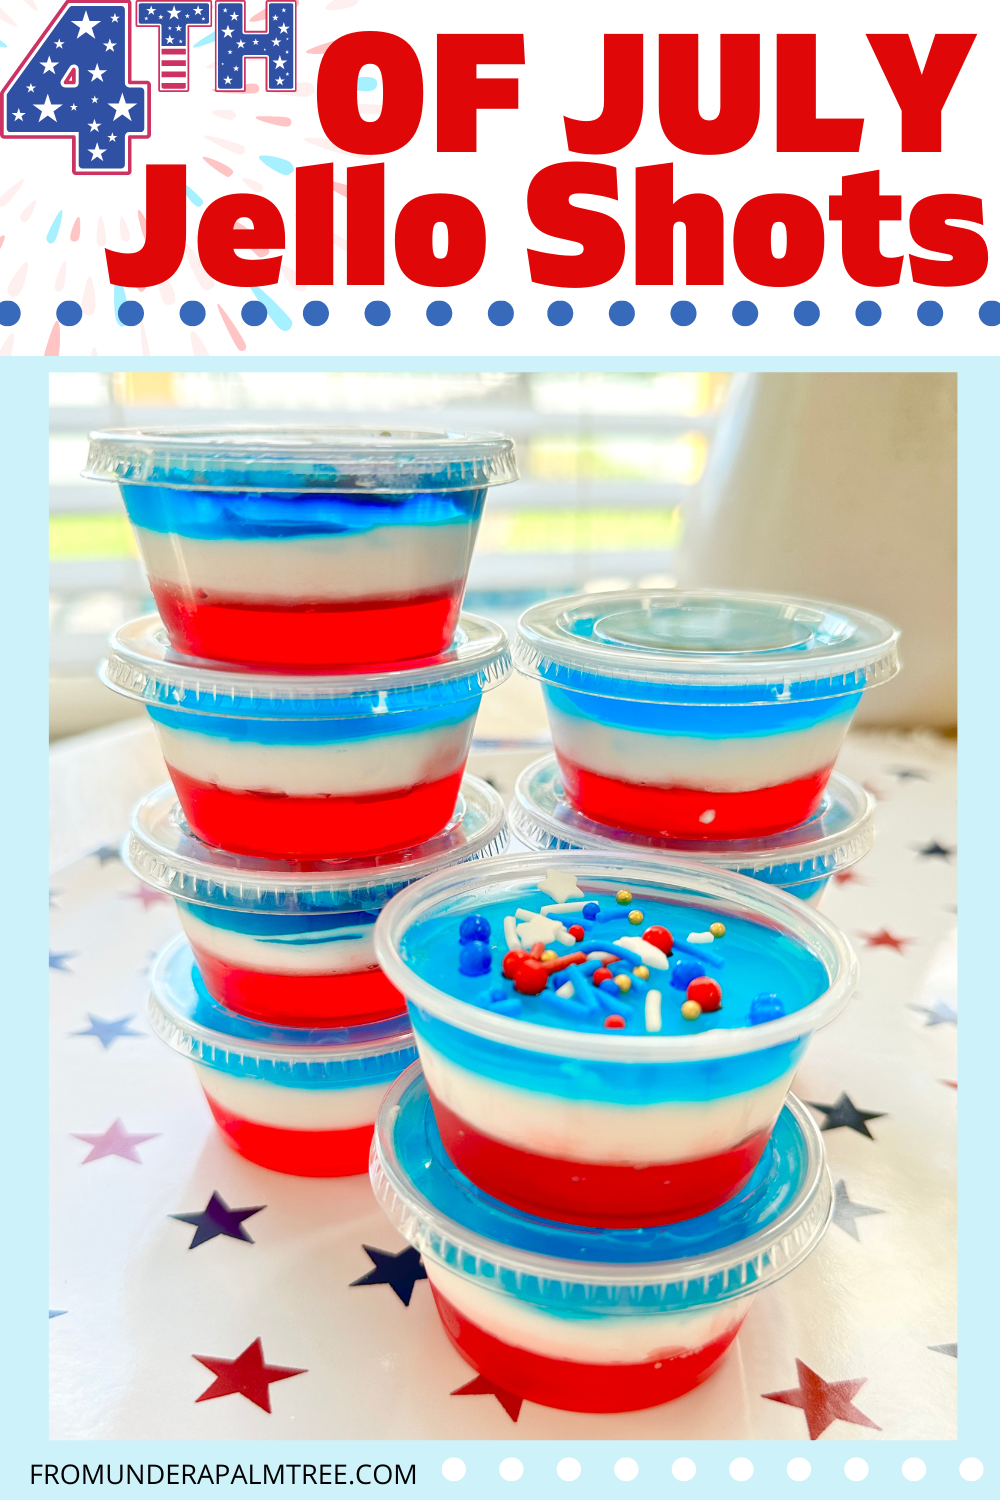 4th of july jello shots | 4th of july themed jello shots | coconut rum jello shots | DIY | easy recipe | fromunderapalmtree | how to make the white layer in red white and blue jello shots | jello shots jello | jello shots recipe | jello shots with cool whip | jello shots with rum | jello shots with vodka | lifestyle blog | mom blogger | non alcoholic jello shots | non alcoholic red white and blue jello shots | party | party foods | red white and blue jello shots | red white and blue jello shots recipe | red white and blue jello shots with cream cheese | red white and blue jello shots with malibu | red white and blue jello shots with vodka | white jello shots with condensed milk | adult drinks | adult shots | red white and blue jello | red white and blue jello dessert | red white and blue jello cups | red white and blue jello poke cake | red white and blue jello salad | red white and blue jello cake | red white and blue jello shots alcohol | red white and blue jello jigglers | red white and blue jello mold | 